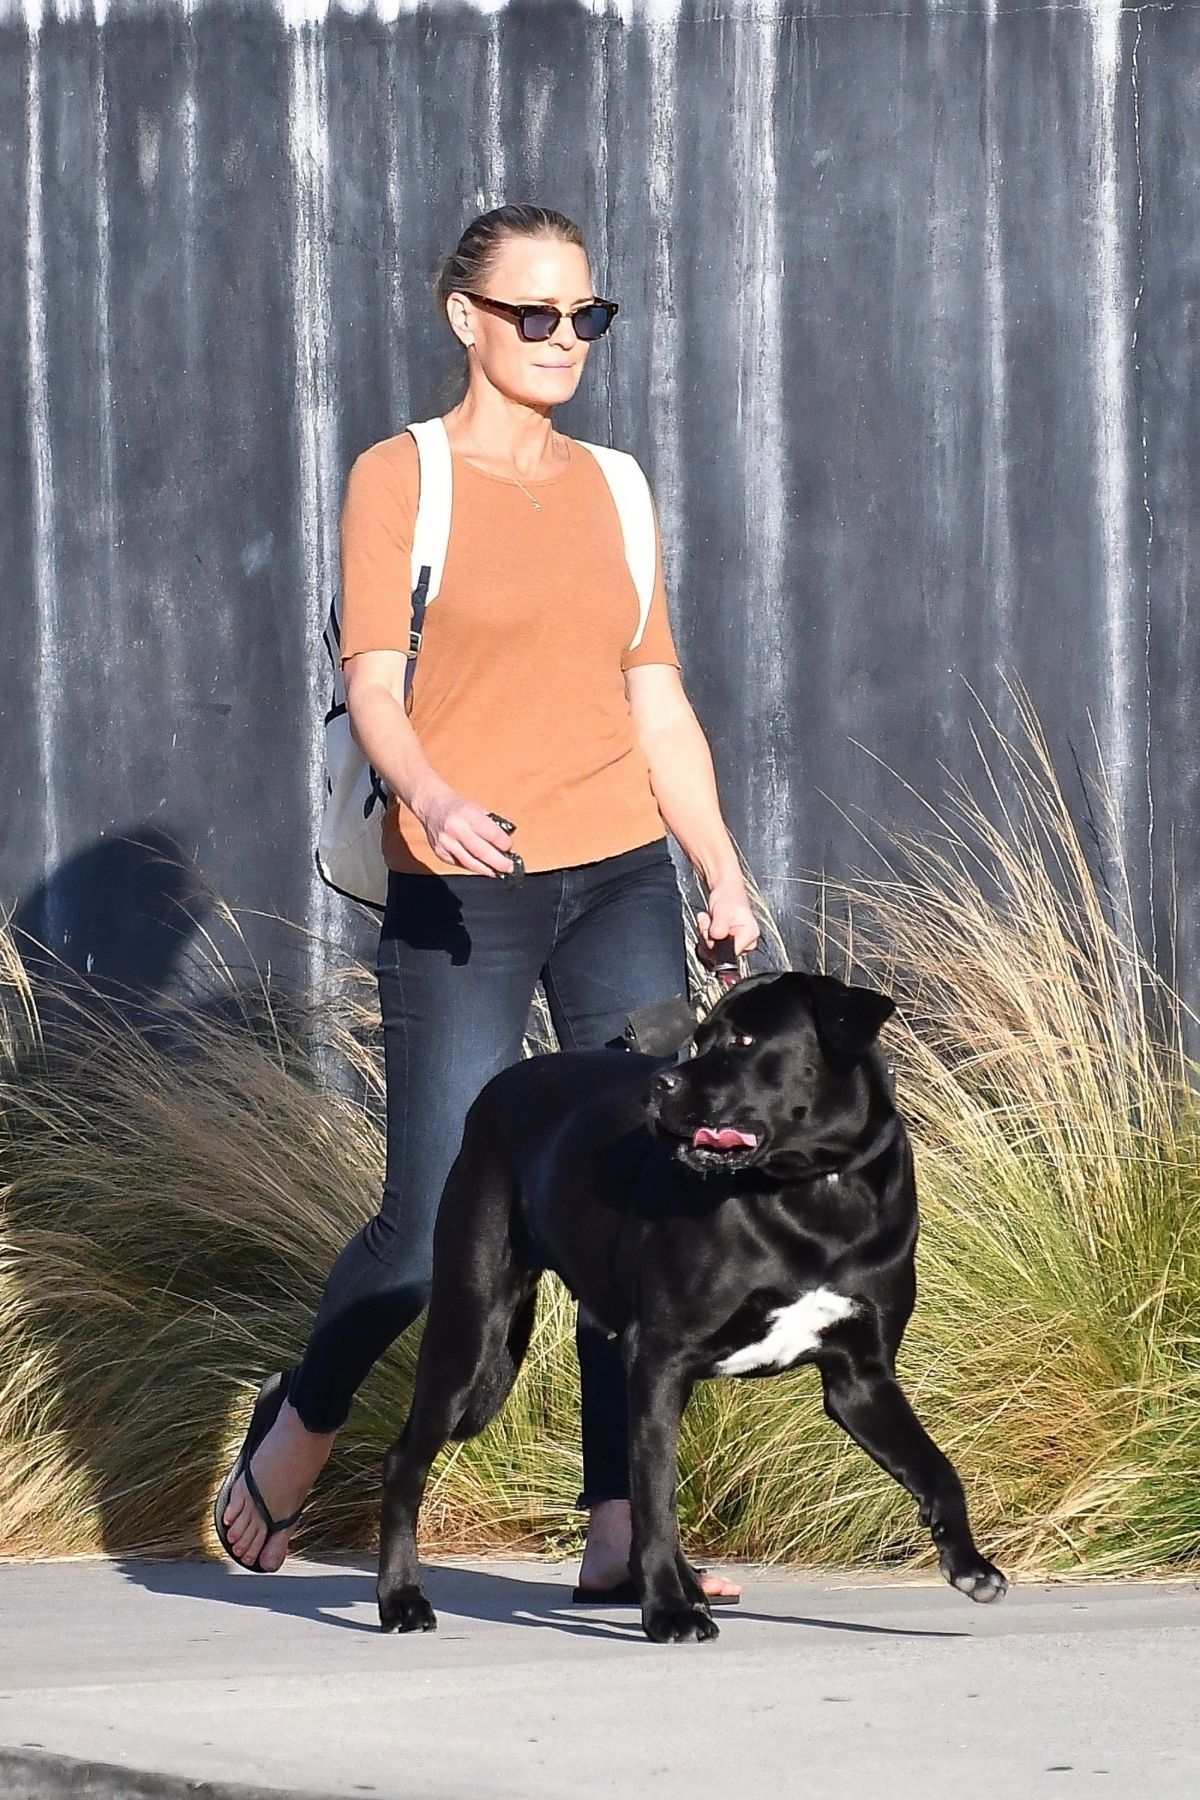 robin-wright-out-with-her-dog-in-brentwood-10-12-2020-9.jpg